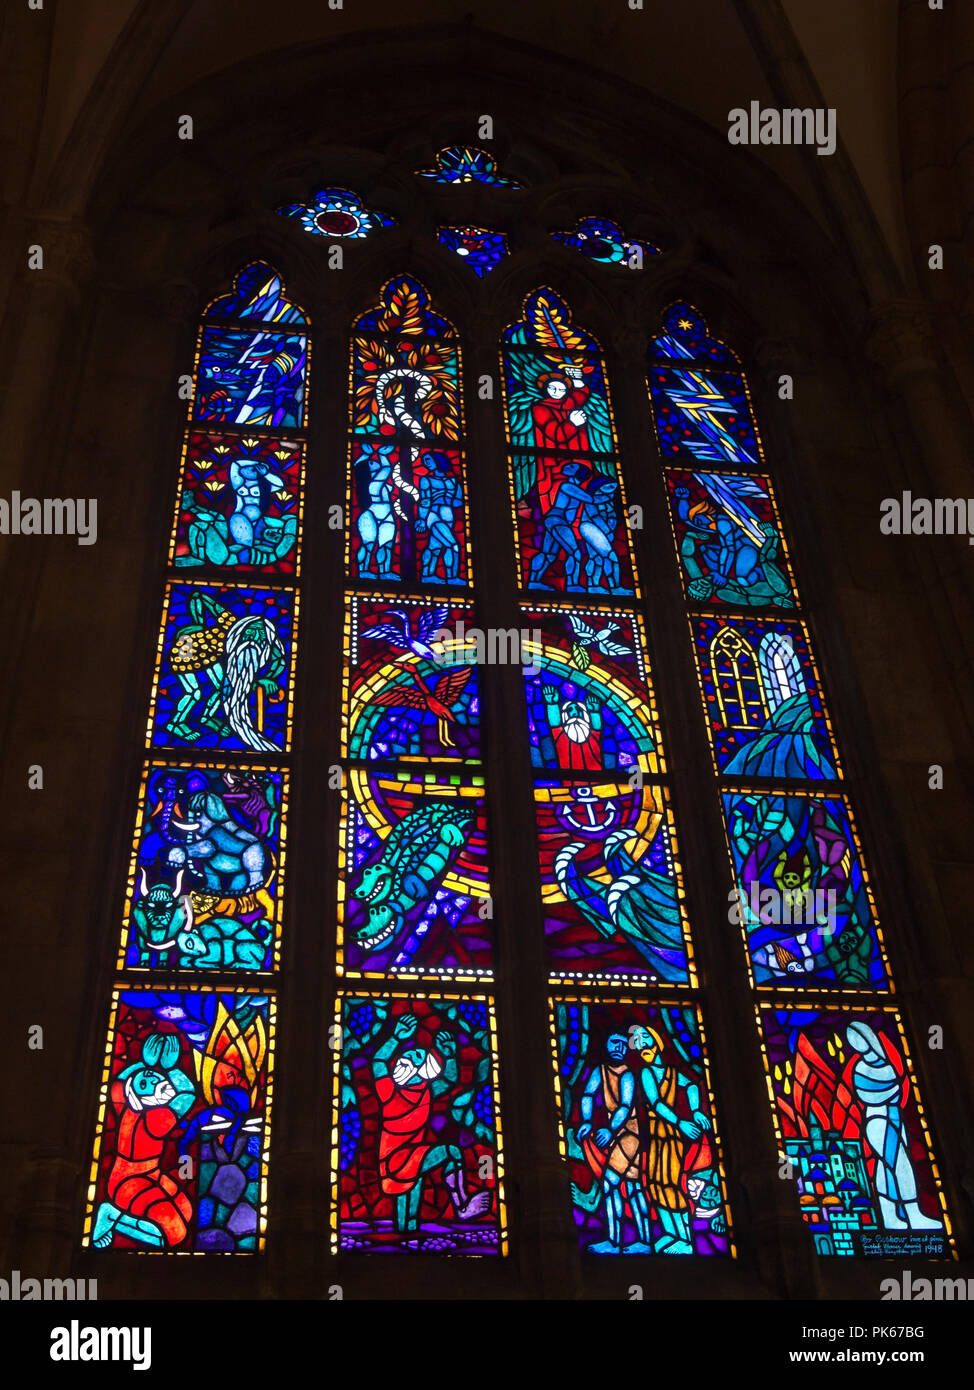 Skara Cathedral in 13th century Gothic style is a bishops seat in the Swedish town of Skara, post WWII stained glass window by artist Bo Beskow Stock Photo